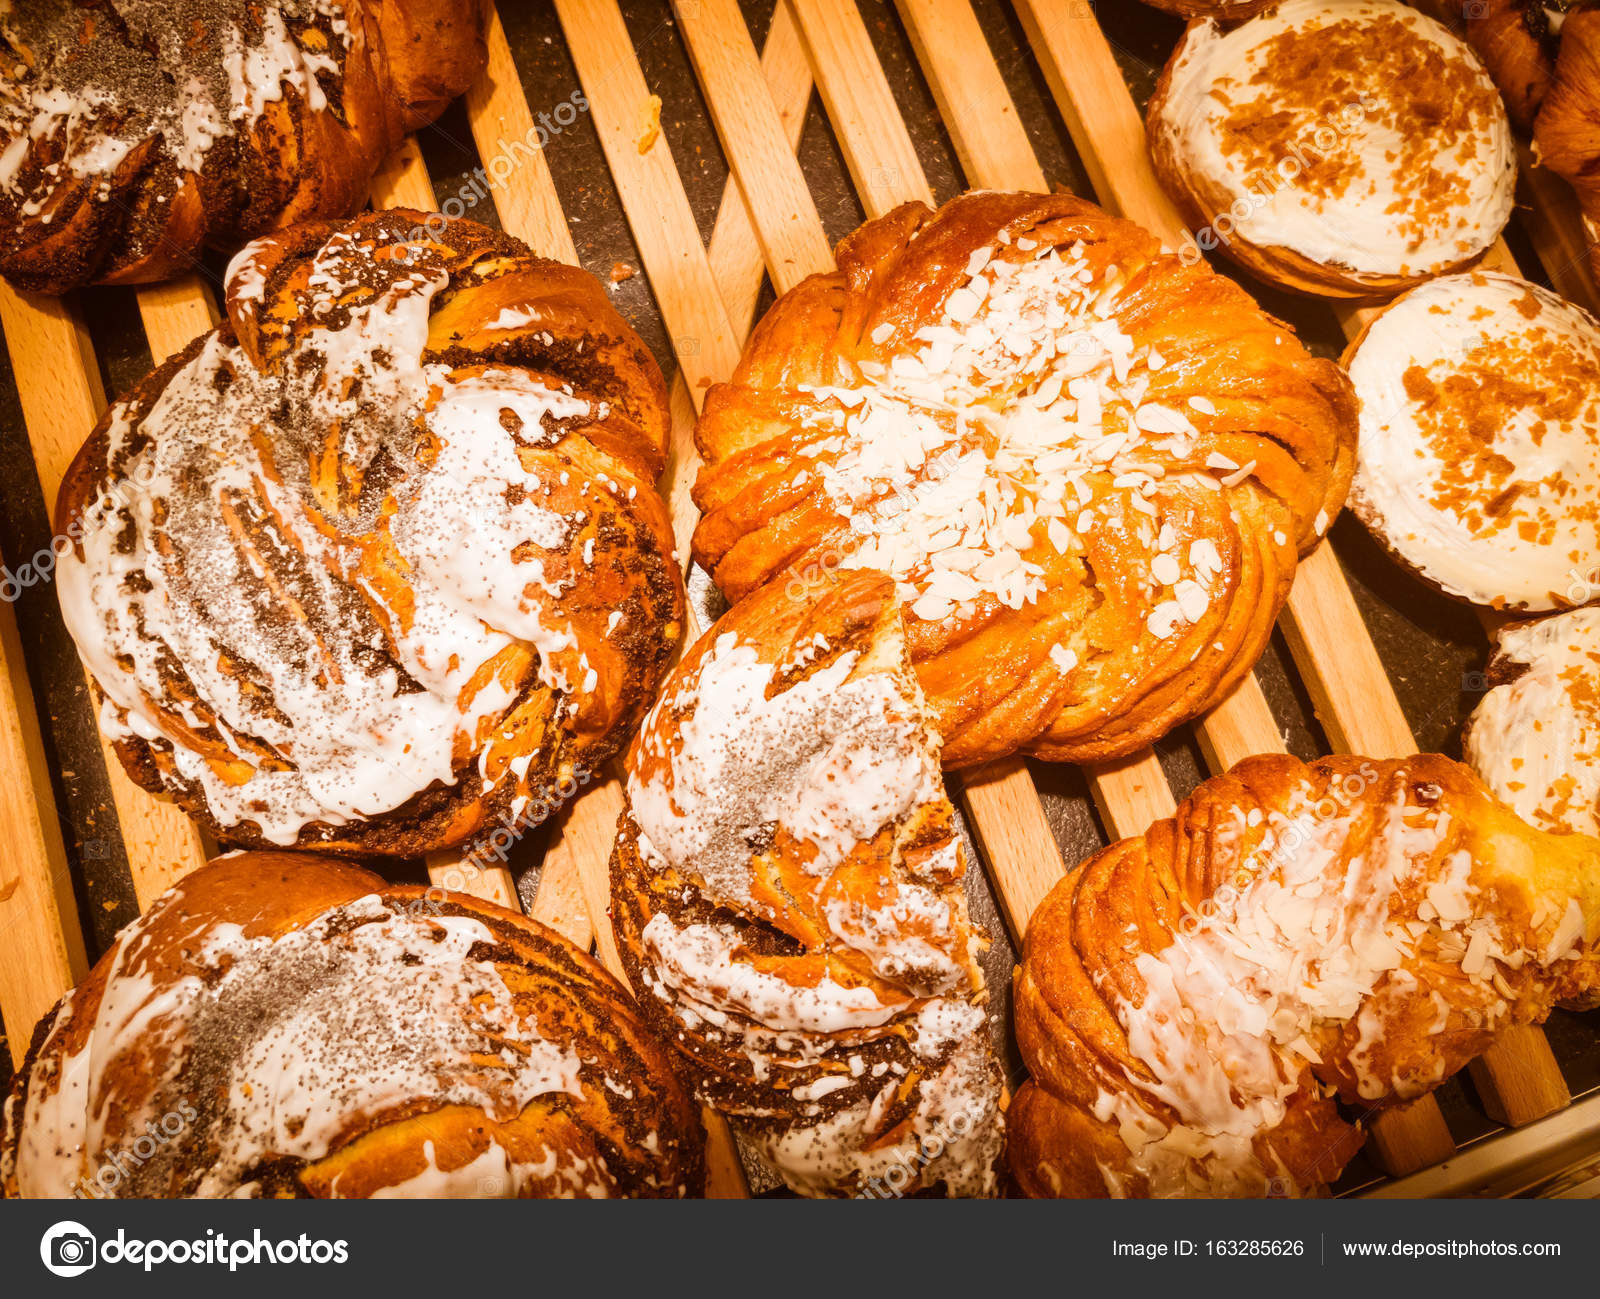 Fresh pastries for sale in the bakery — Stock Photo © toxawww #163285626